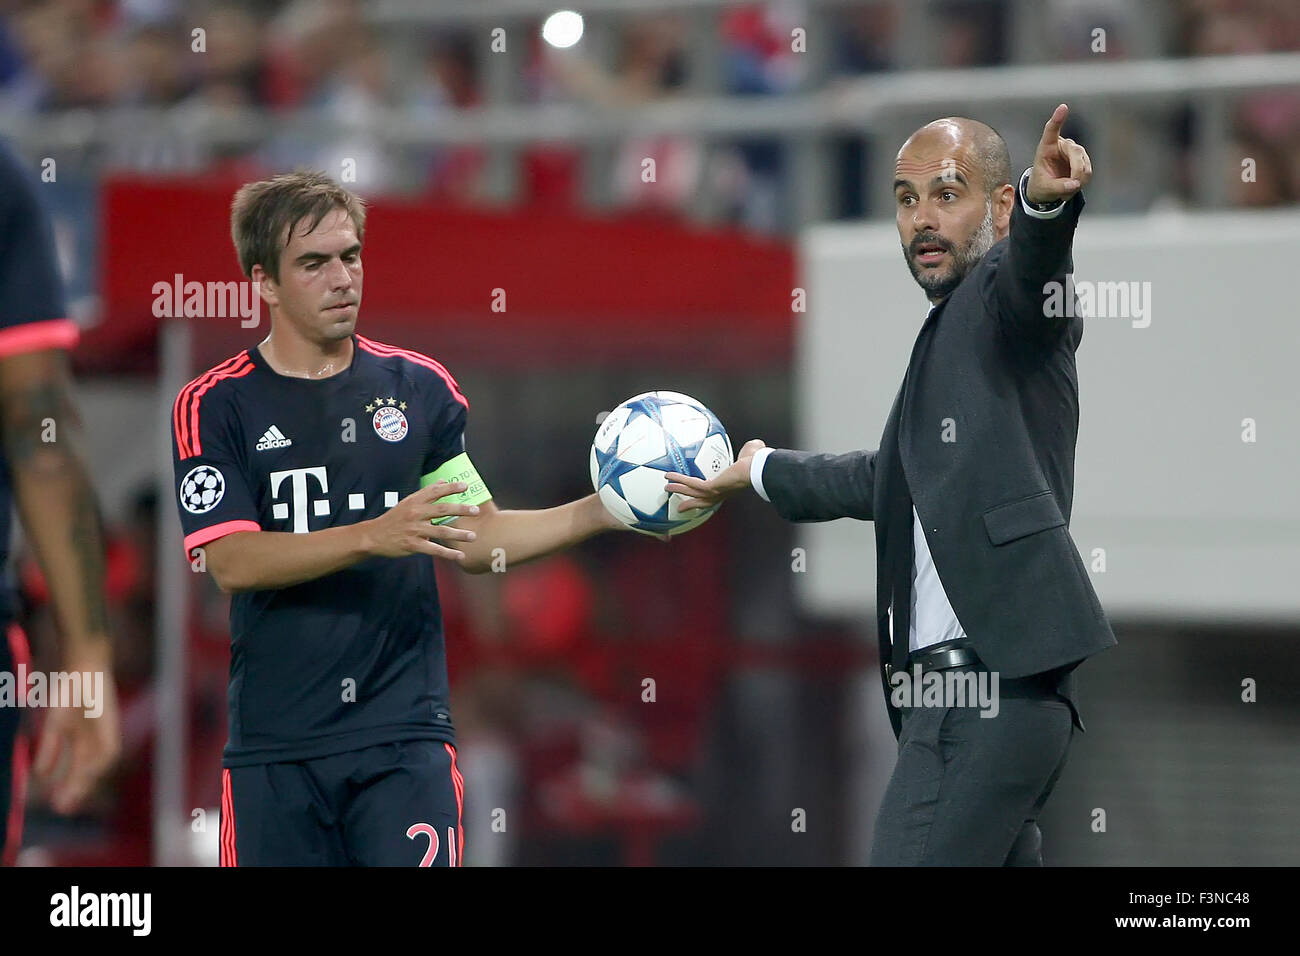 Athens, Greece- September 16, 2015: Philipp Lahm (L) taking the ball from Coach Josep Guardiola (R) during the UEFA Champions Le Stock Photo